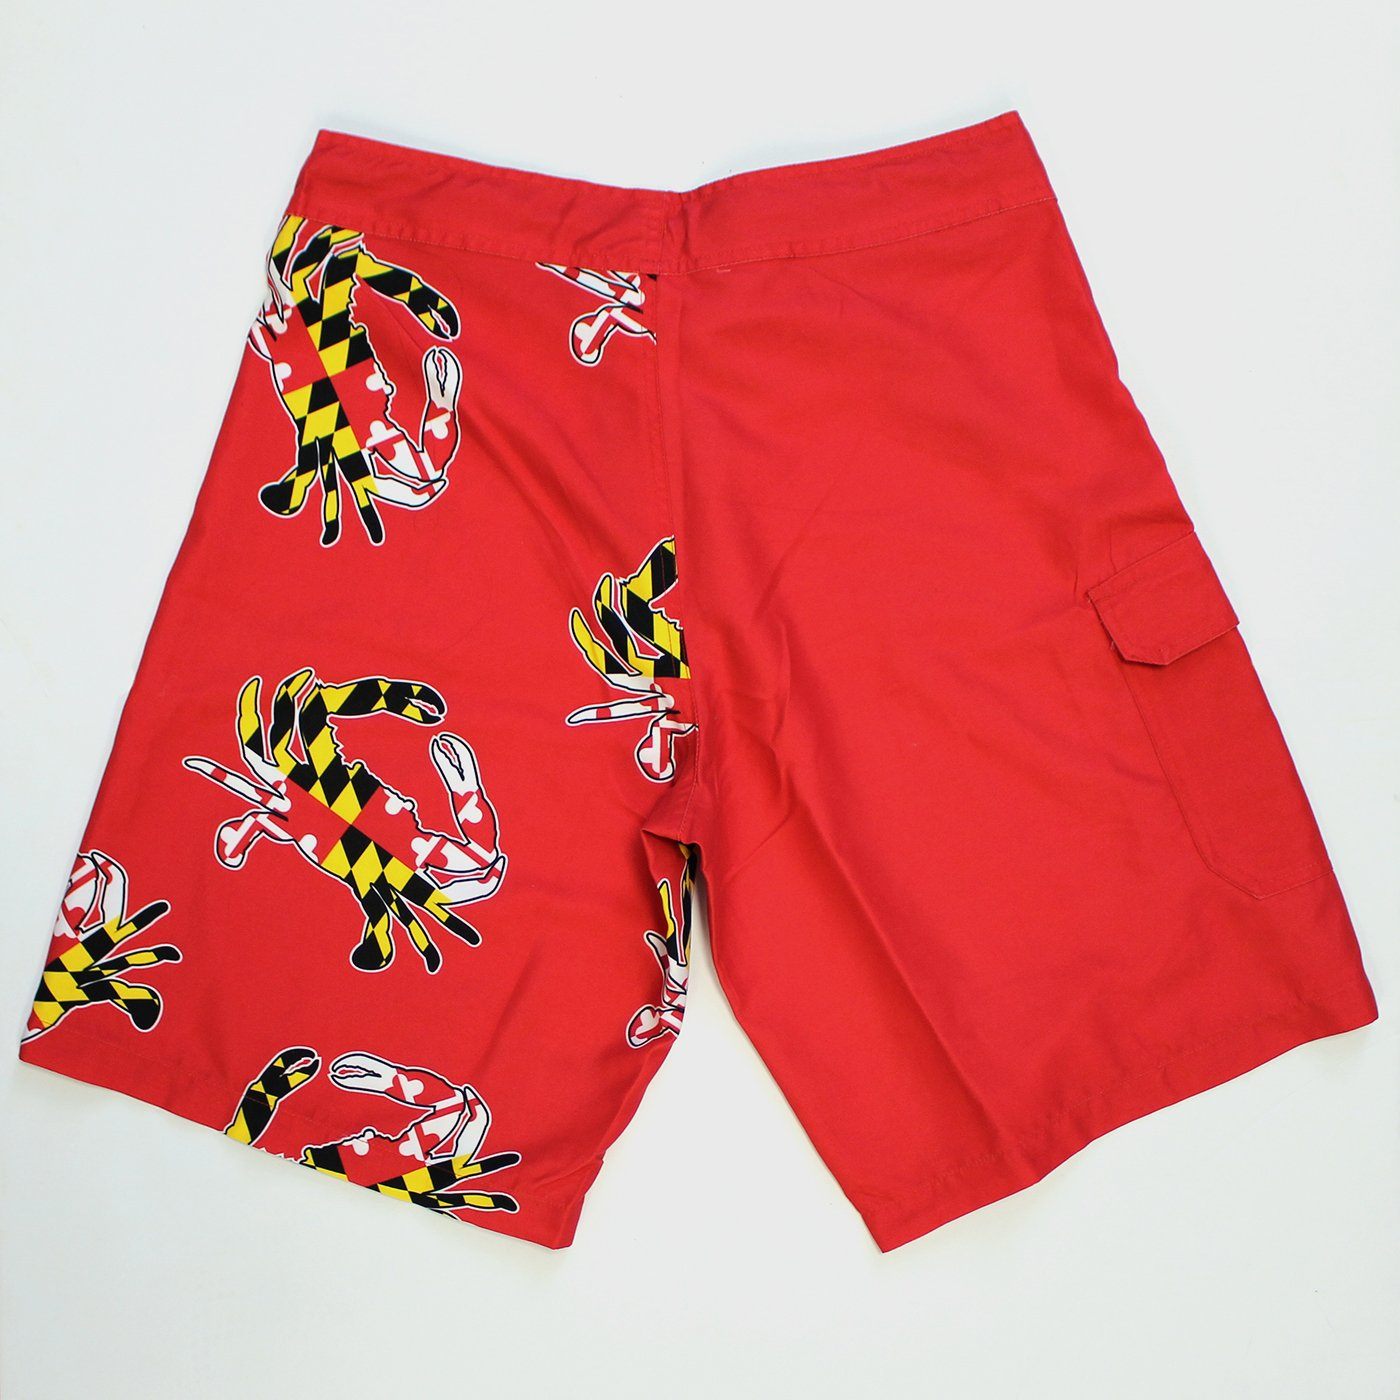 Maryland Full Flag Crab (Red) / Board Shorts - Route One Apparel